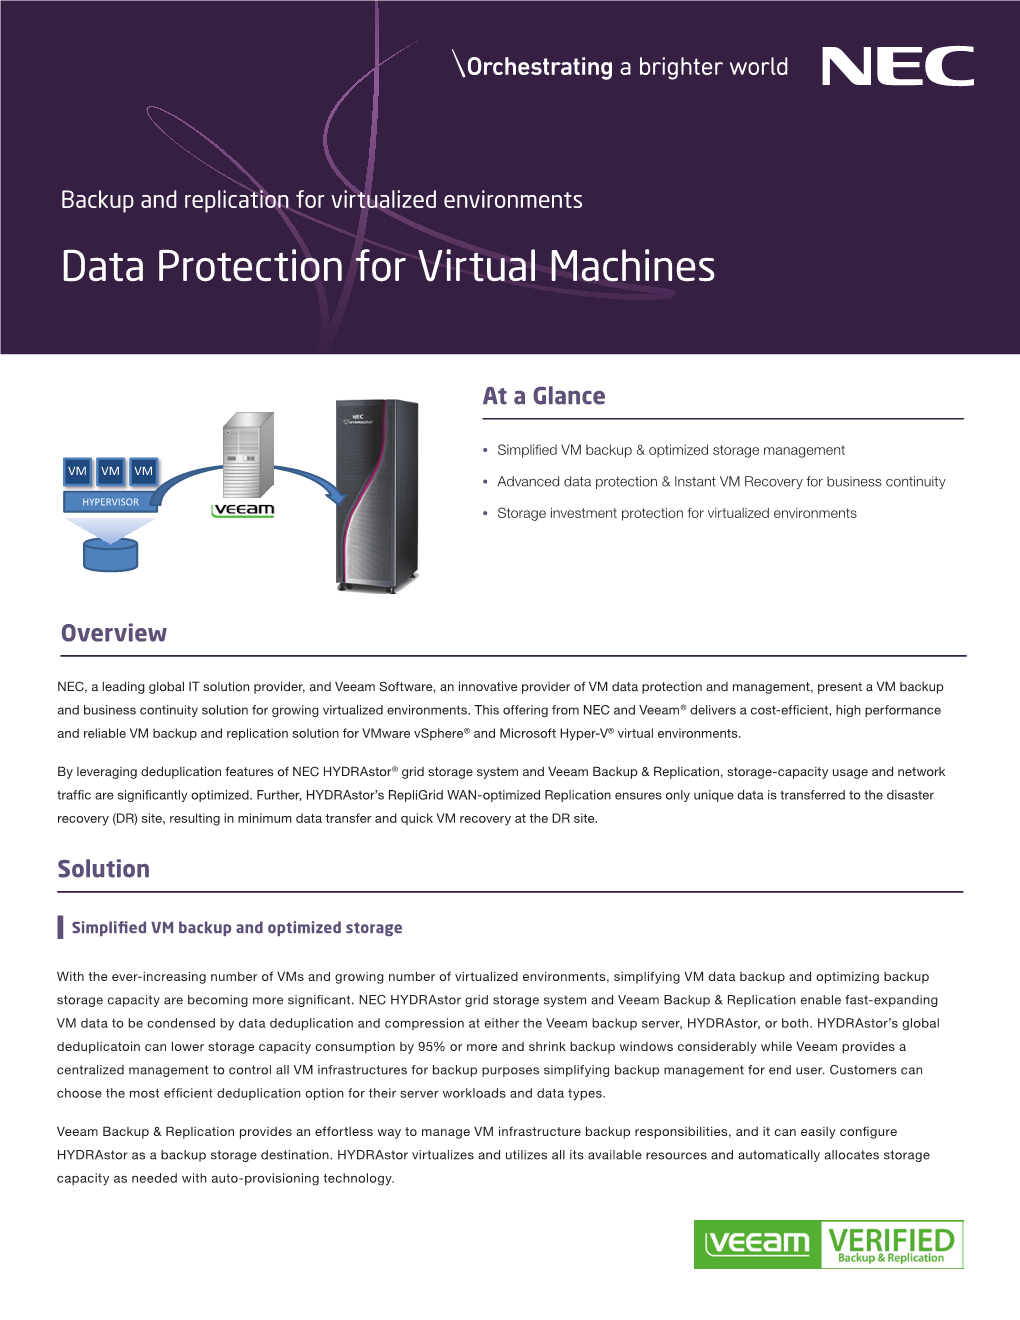 Data Protection for Virtual Machines